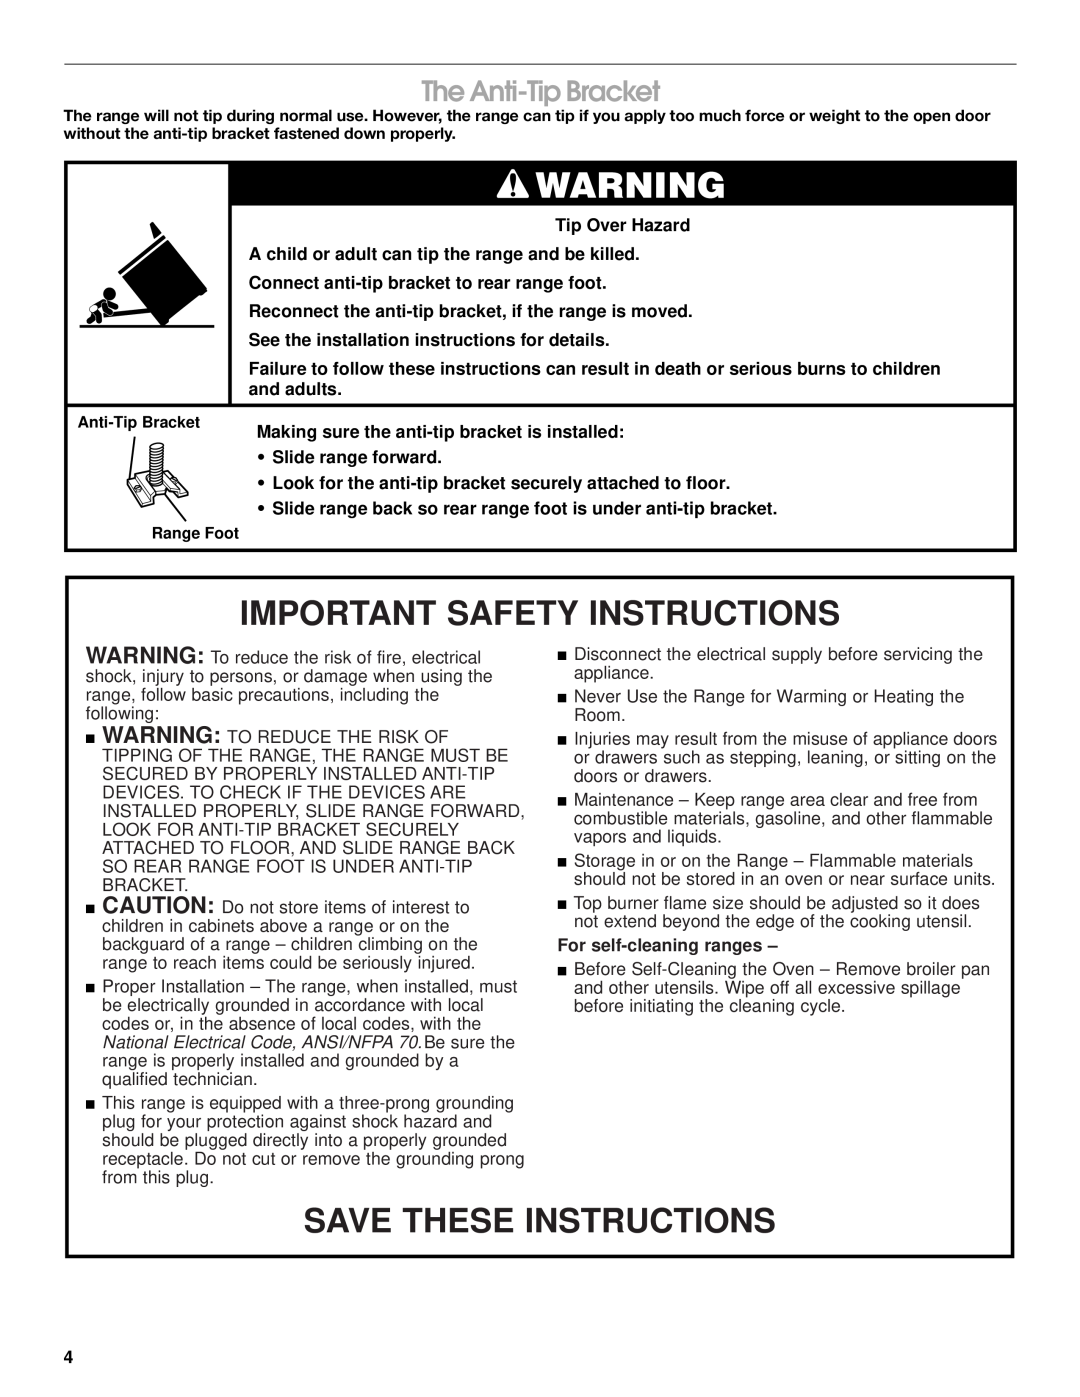 Whirlpool FGP325H The Anti-Tip Bracket, Important Safety Instructions, Save These Instructions, For self-cleaning ranges 